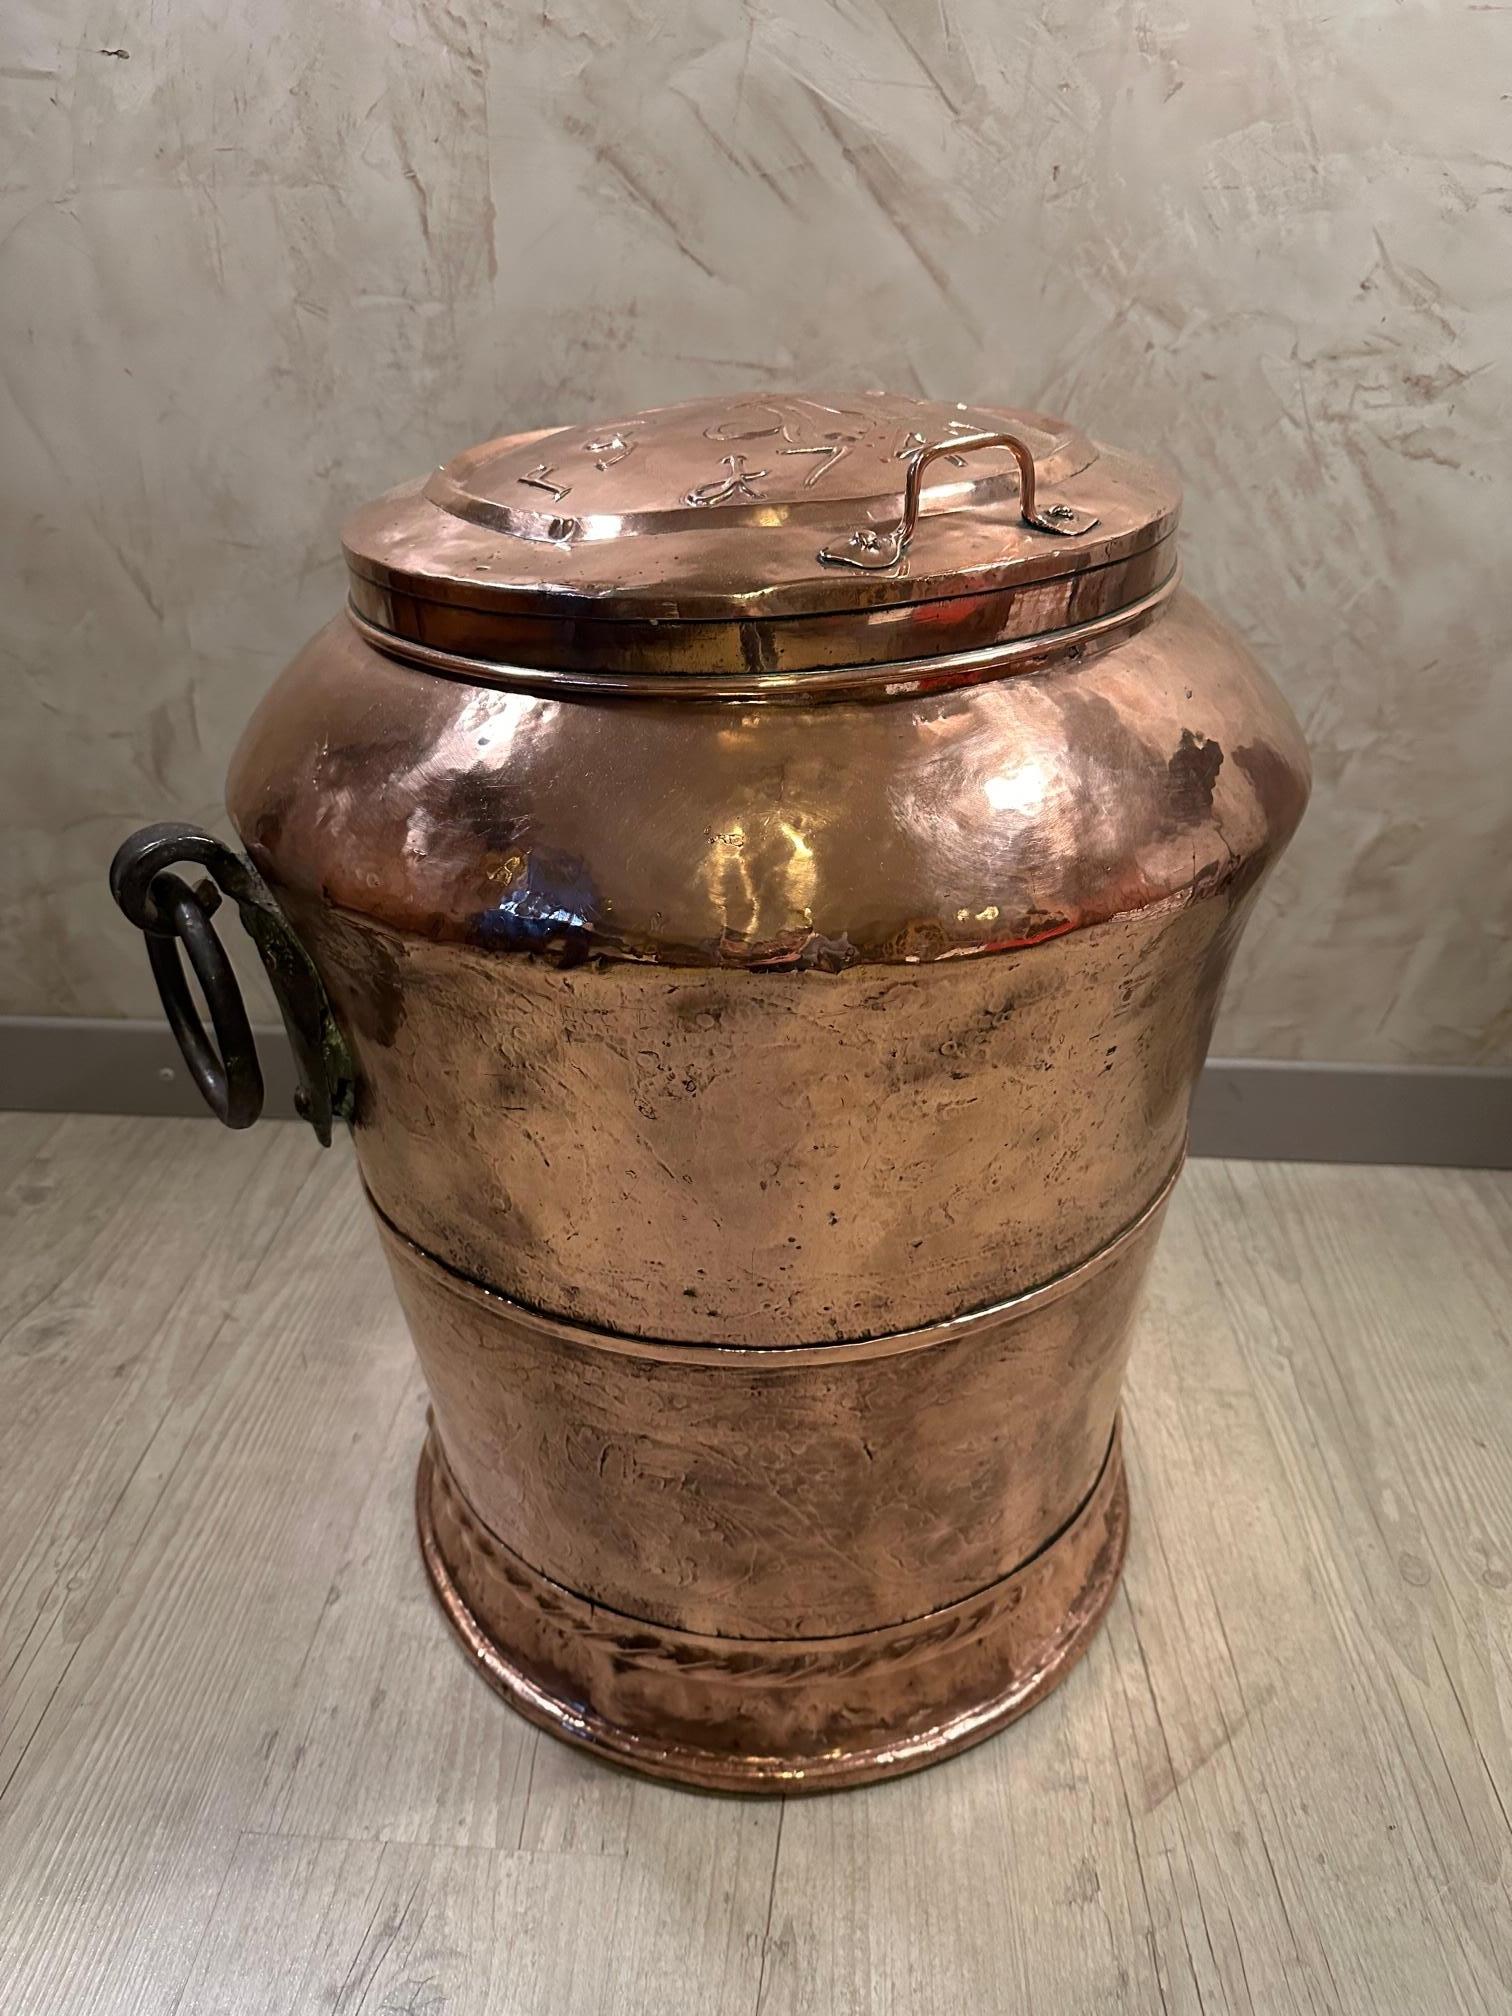 Exceptional 18th century French Louis XIV Period tank or urn made with copper. Used in the kitchens of French castles to store seeds or salt. 
The plug is openable and has the writings of the year 1740 but also the Lily flower symbol of the French